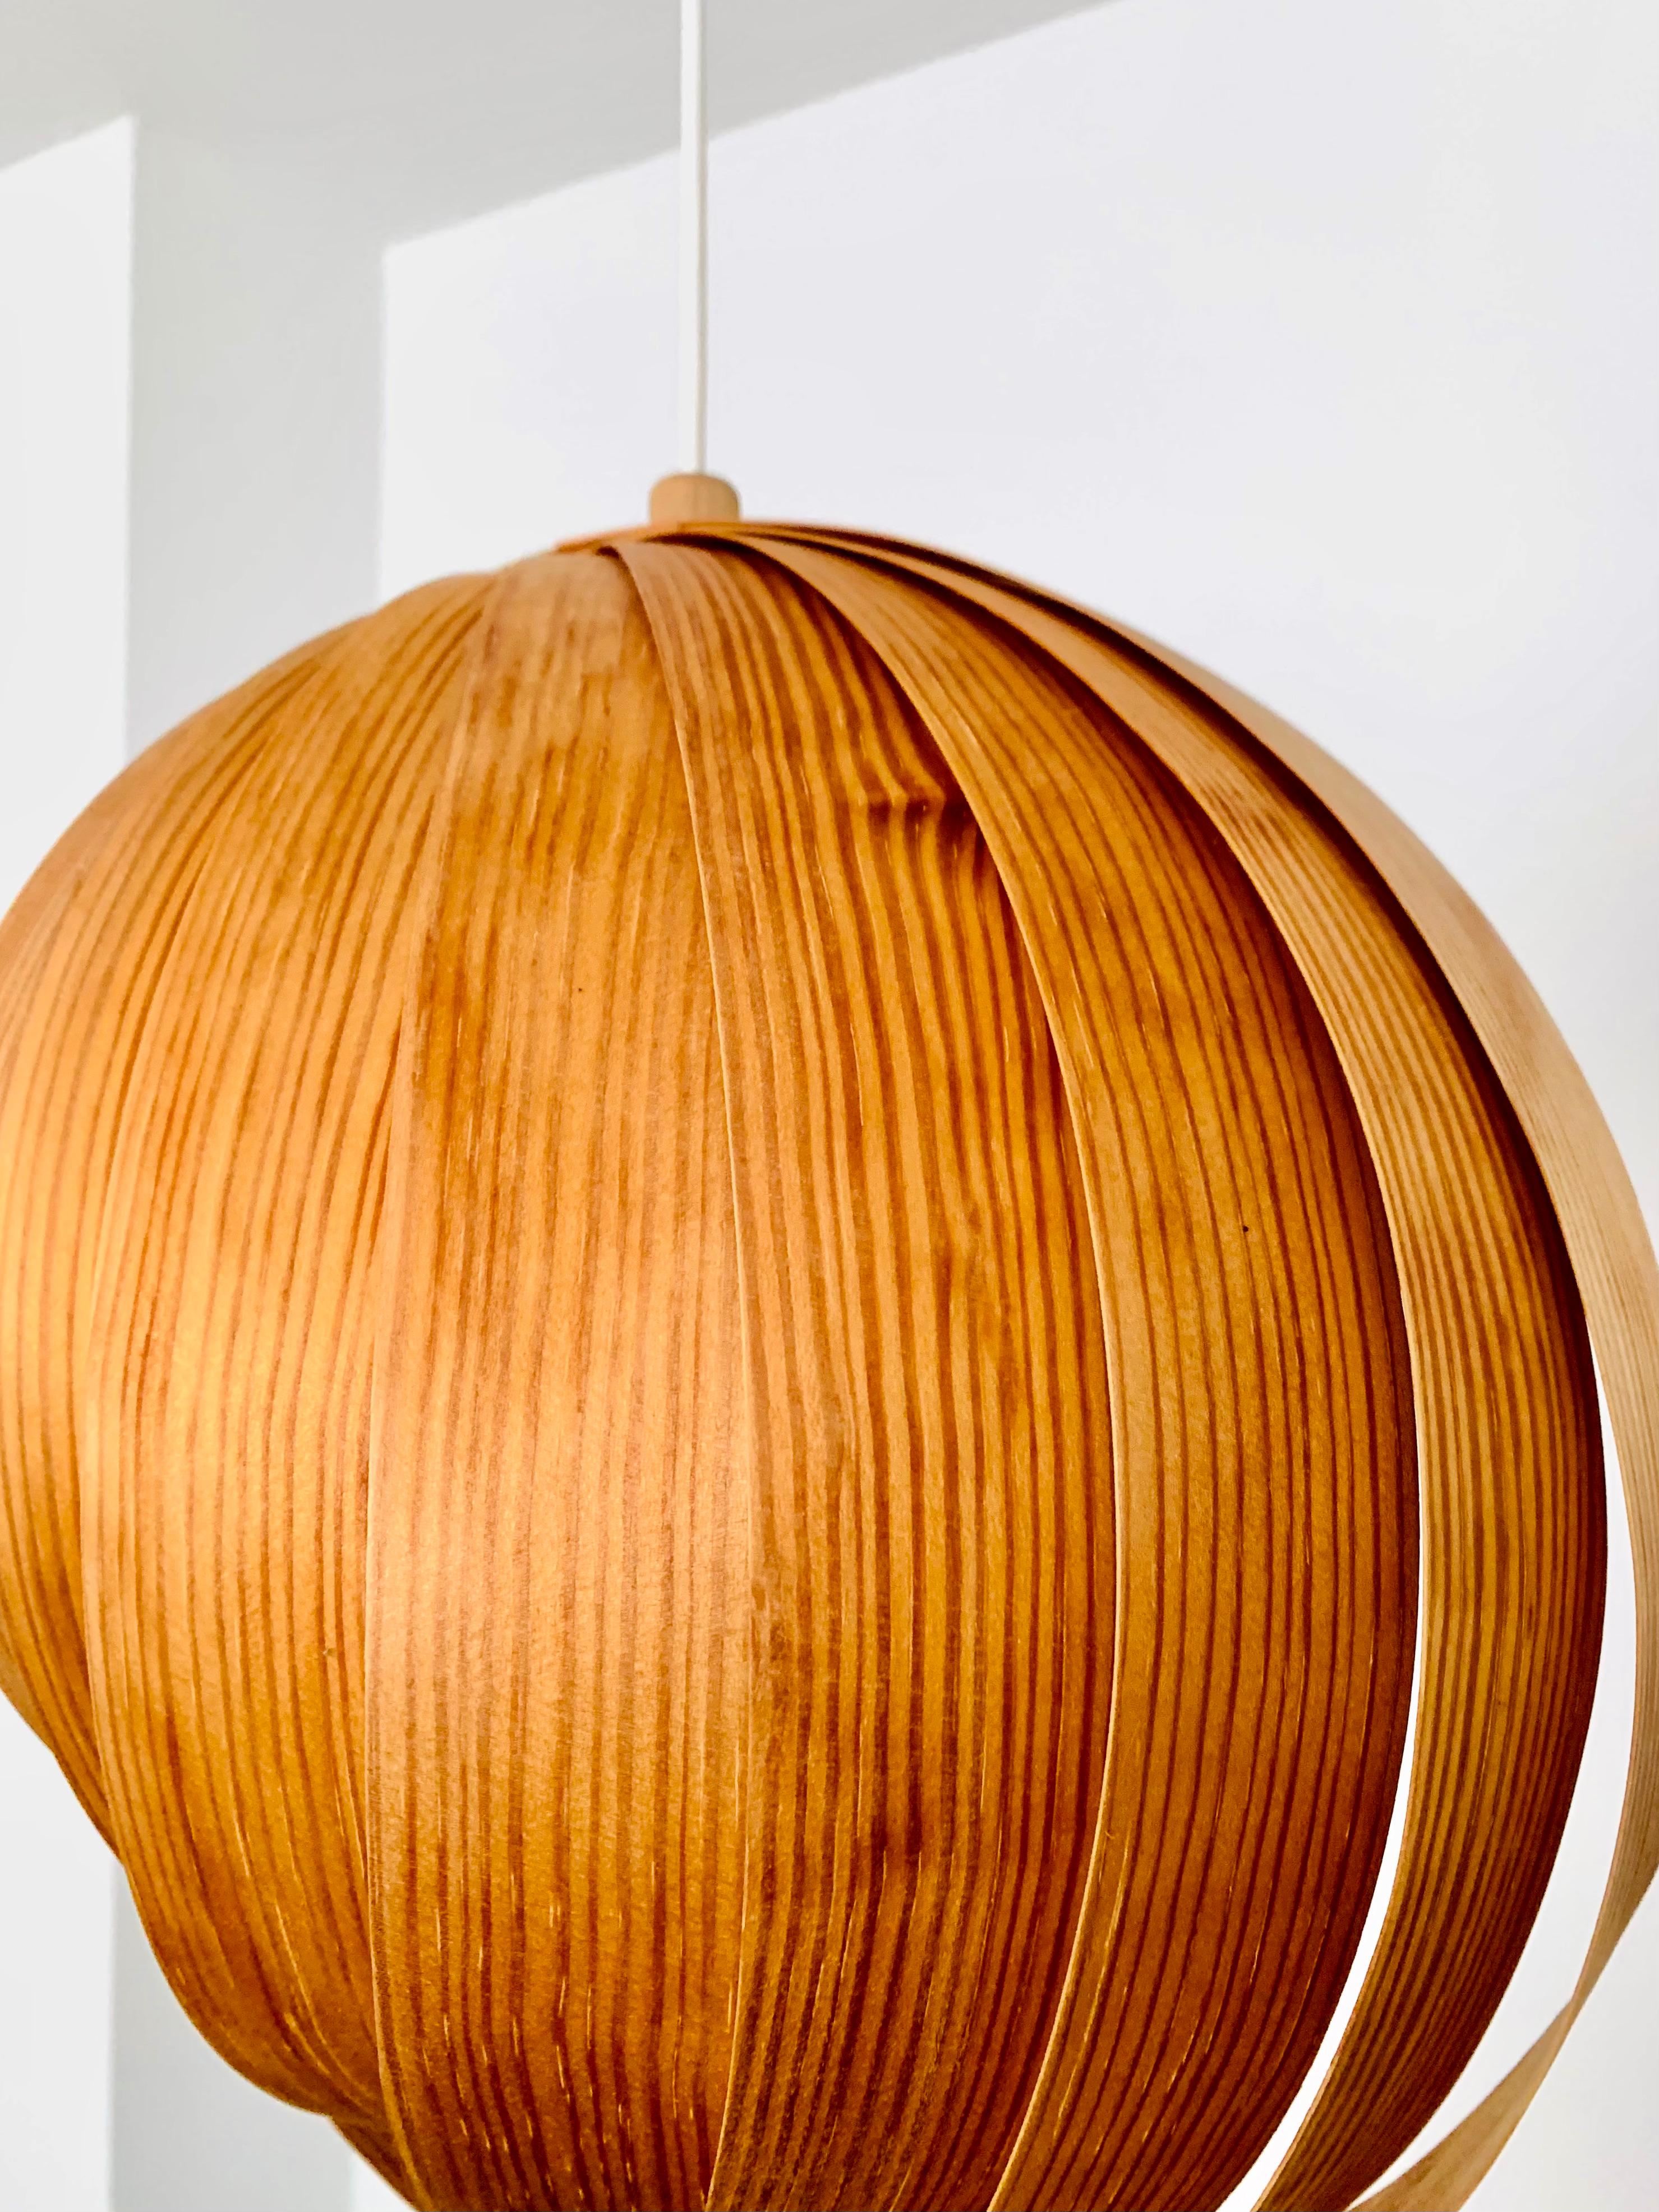 Pine Wooden Moon Pendant Lamp For Sale